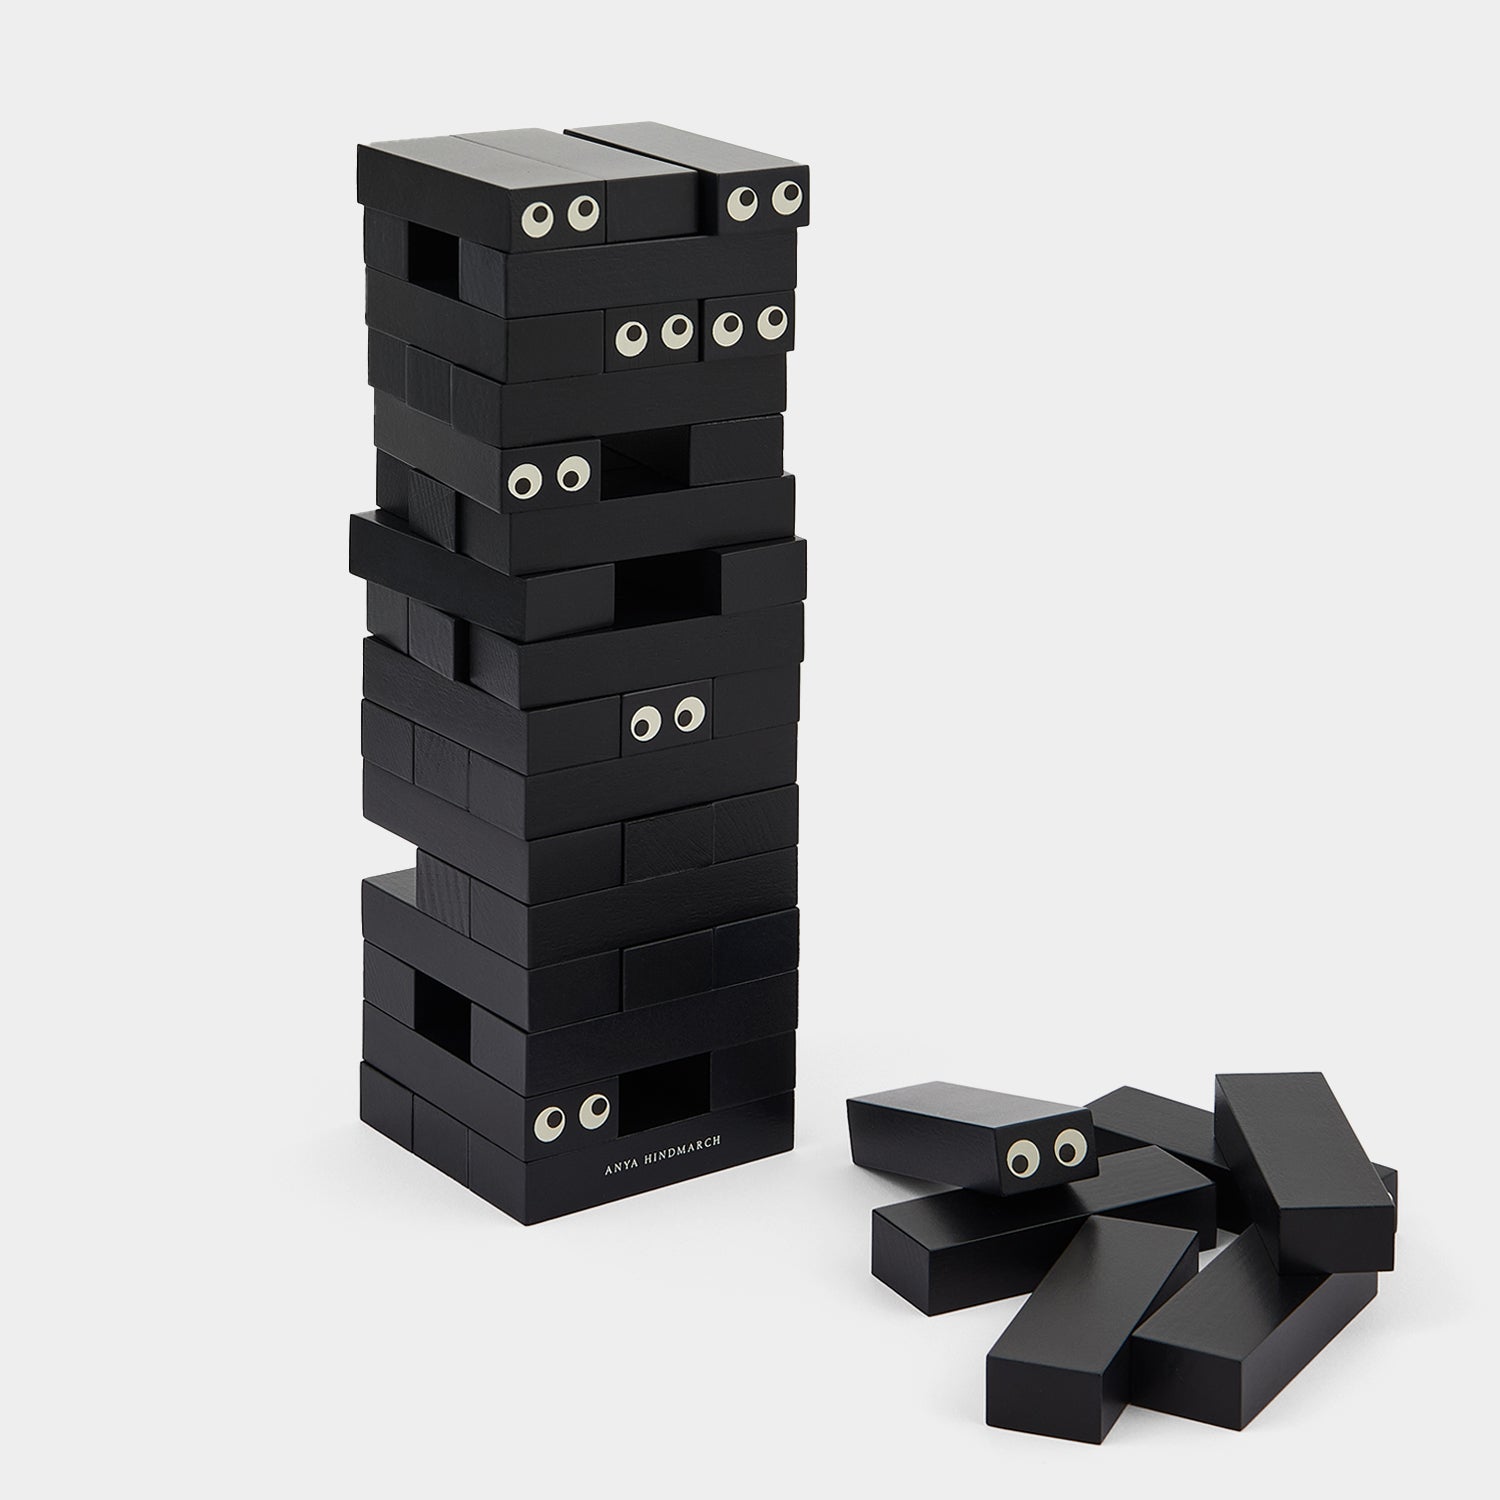 Look Out Tower -

                  
                    Wood in Black -
                  

                  Anya Hindmarch UK
